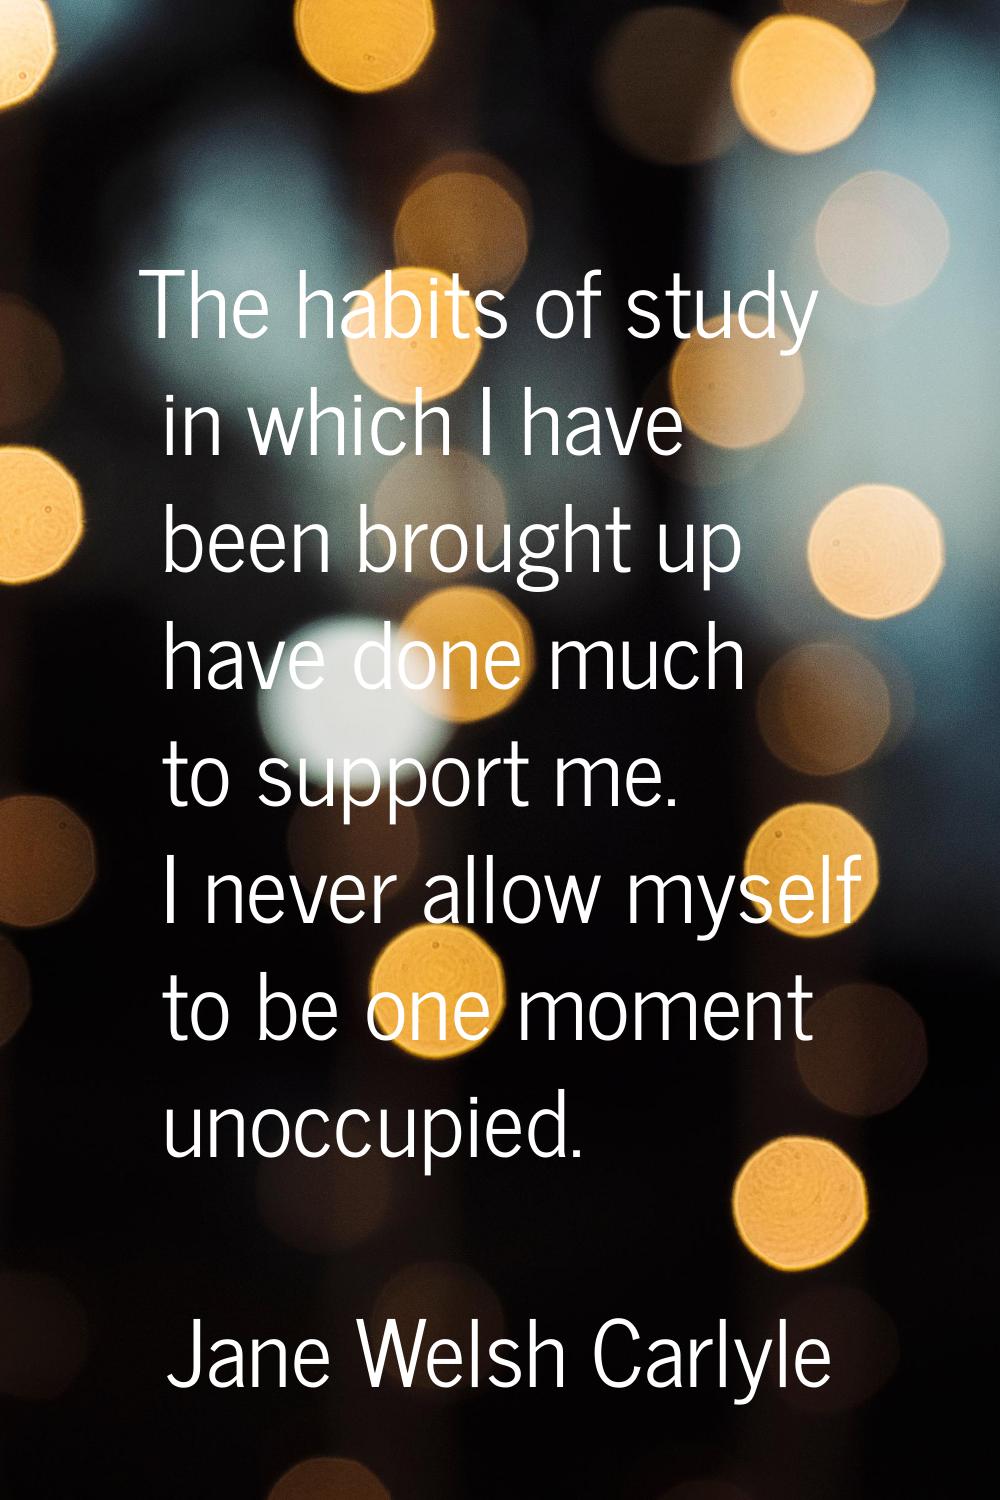 The habits of study in which I have been brought up have done much to support me. I never allow mys